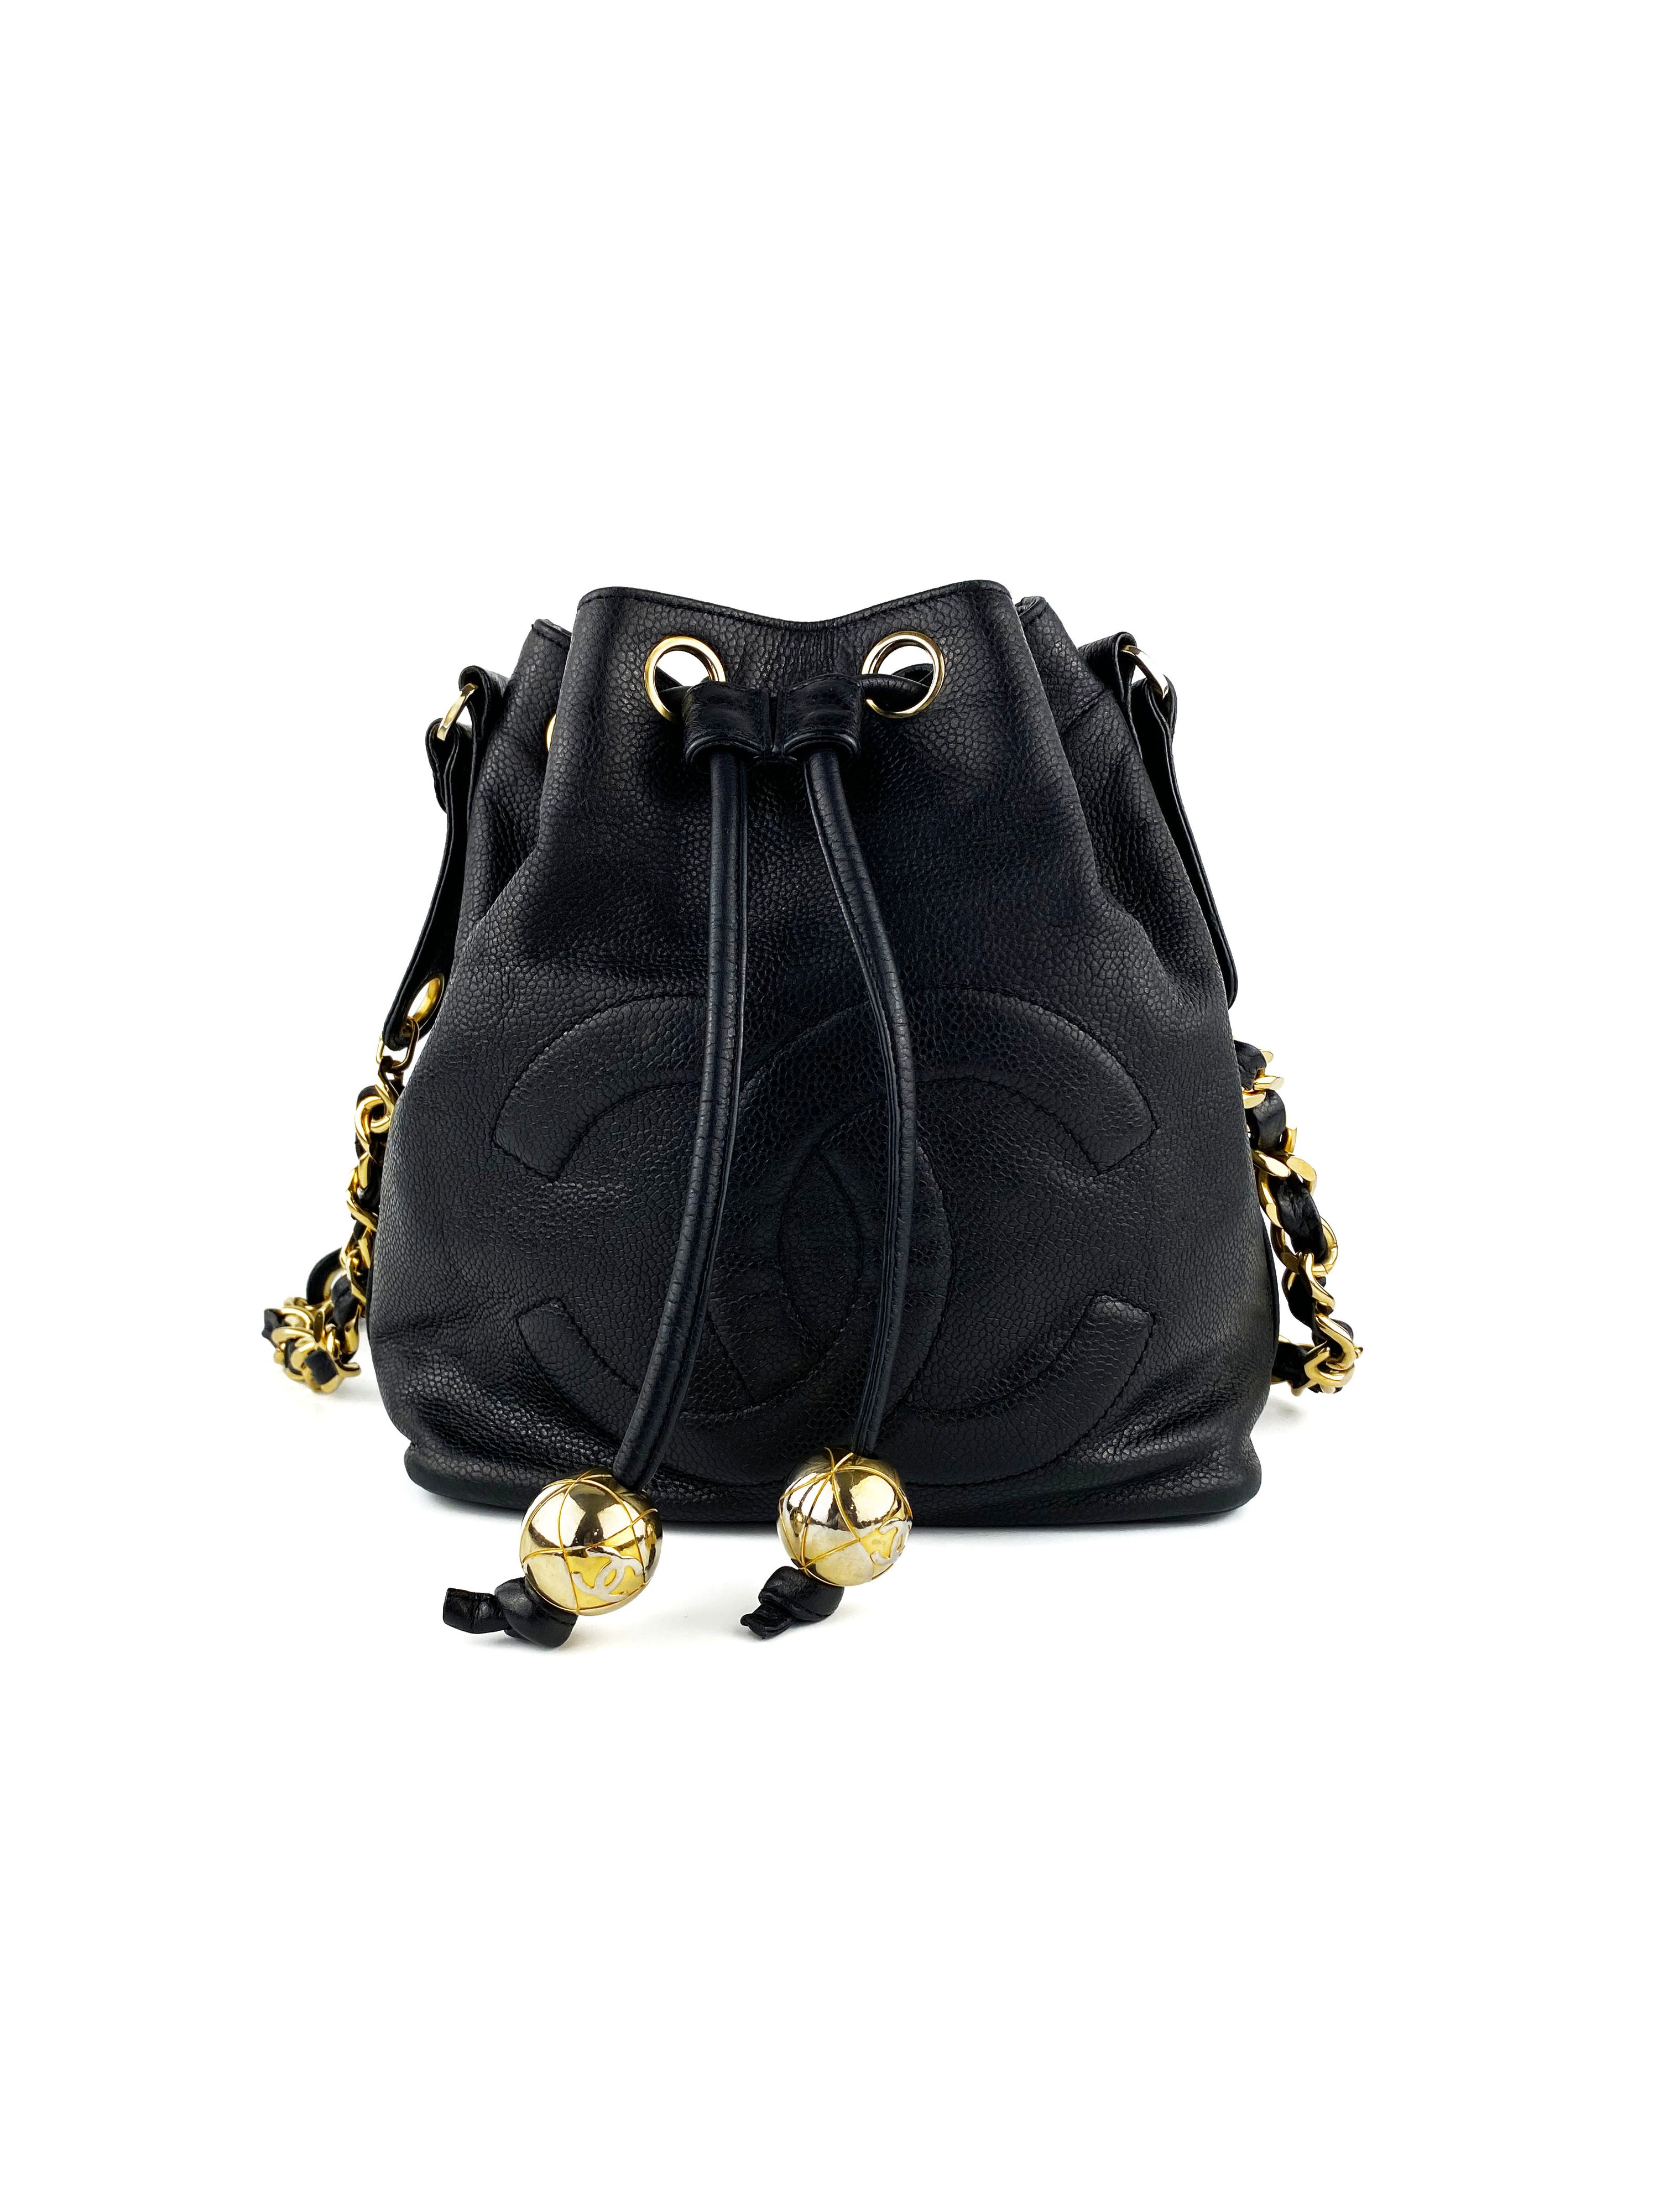 Chanel Vintage Drawstring Bucket Bag with Gold Baubles